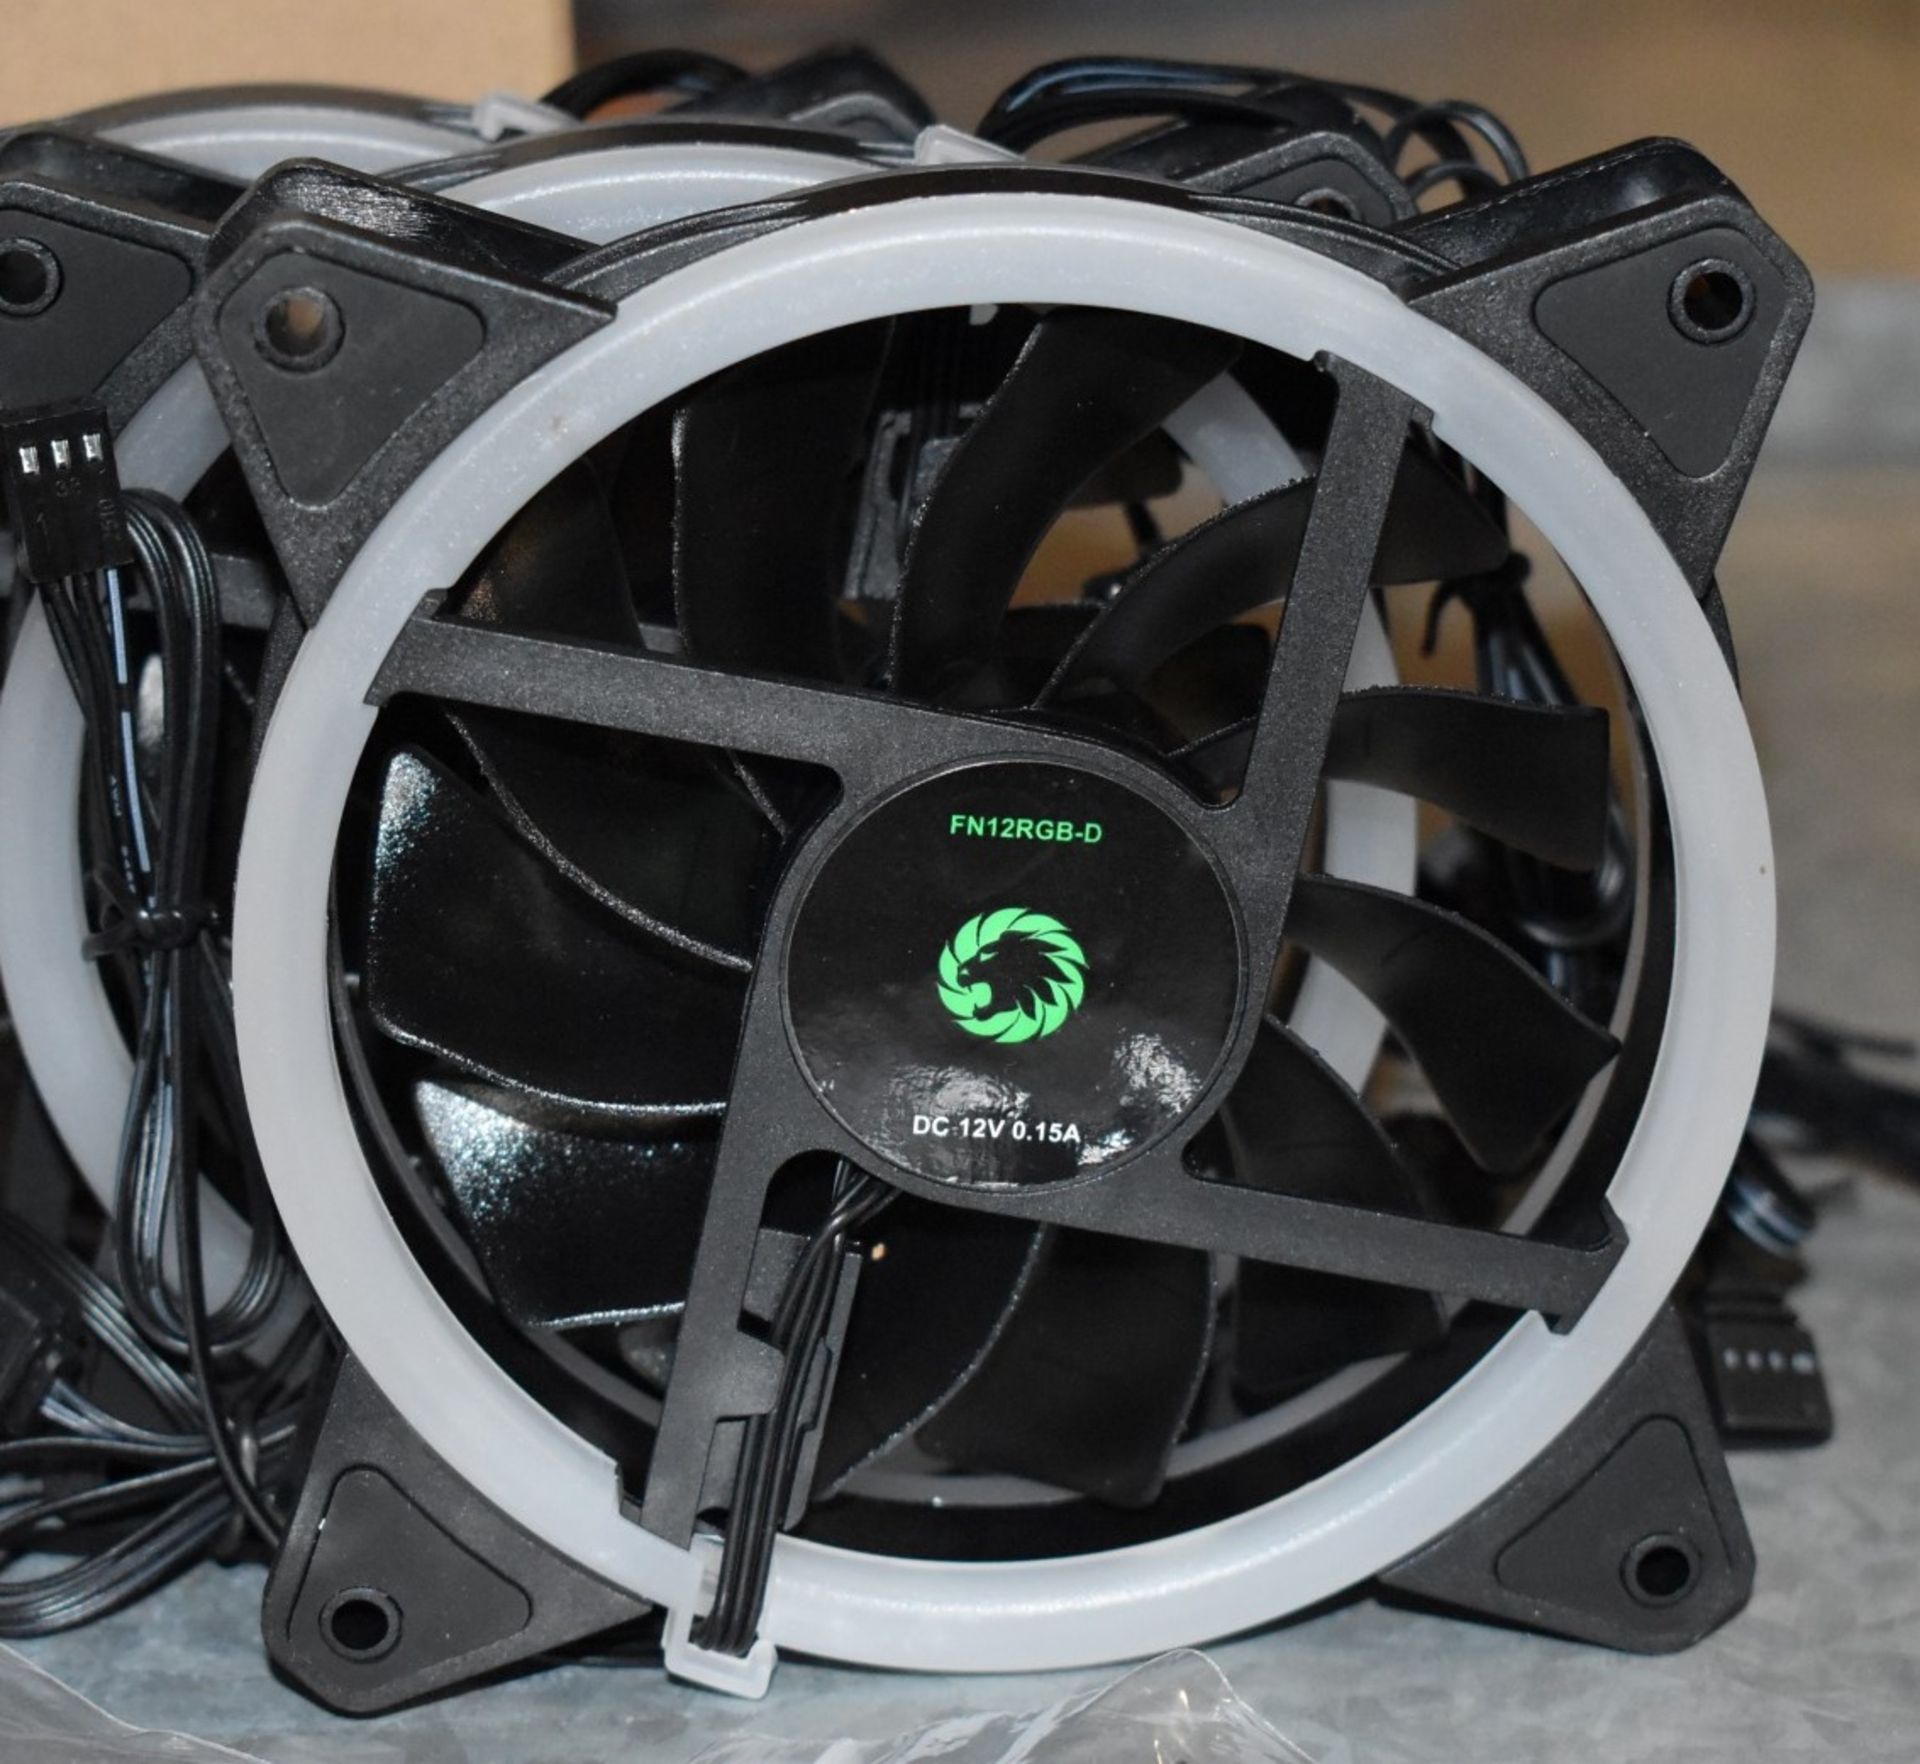 30 x GameMax LED Fan Packs For PC Gaming Cases - Each Packs Include 3 x 120mm LED Case Fans - Image 3 of 8